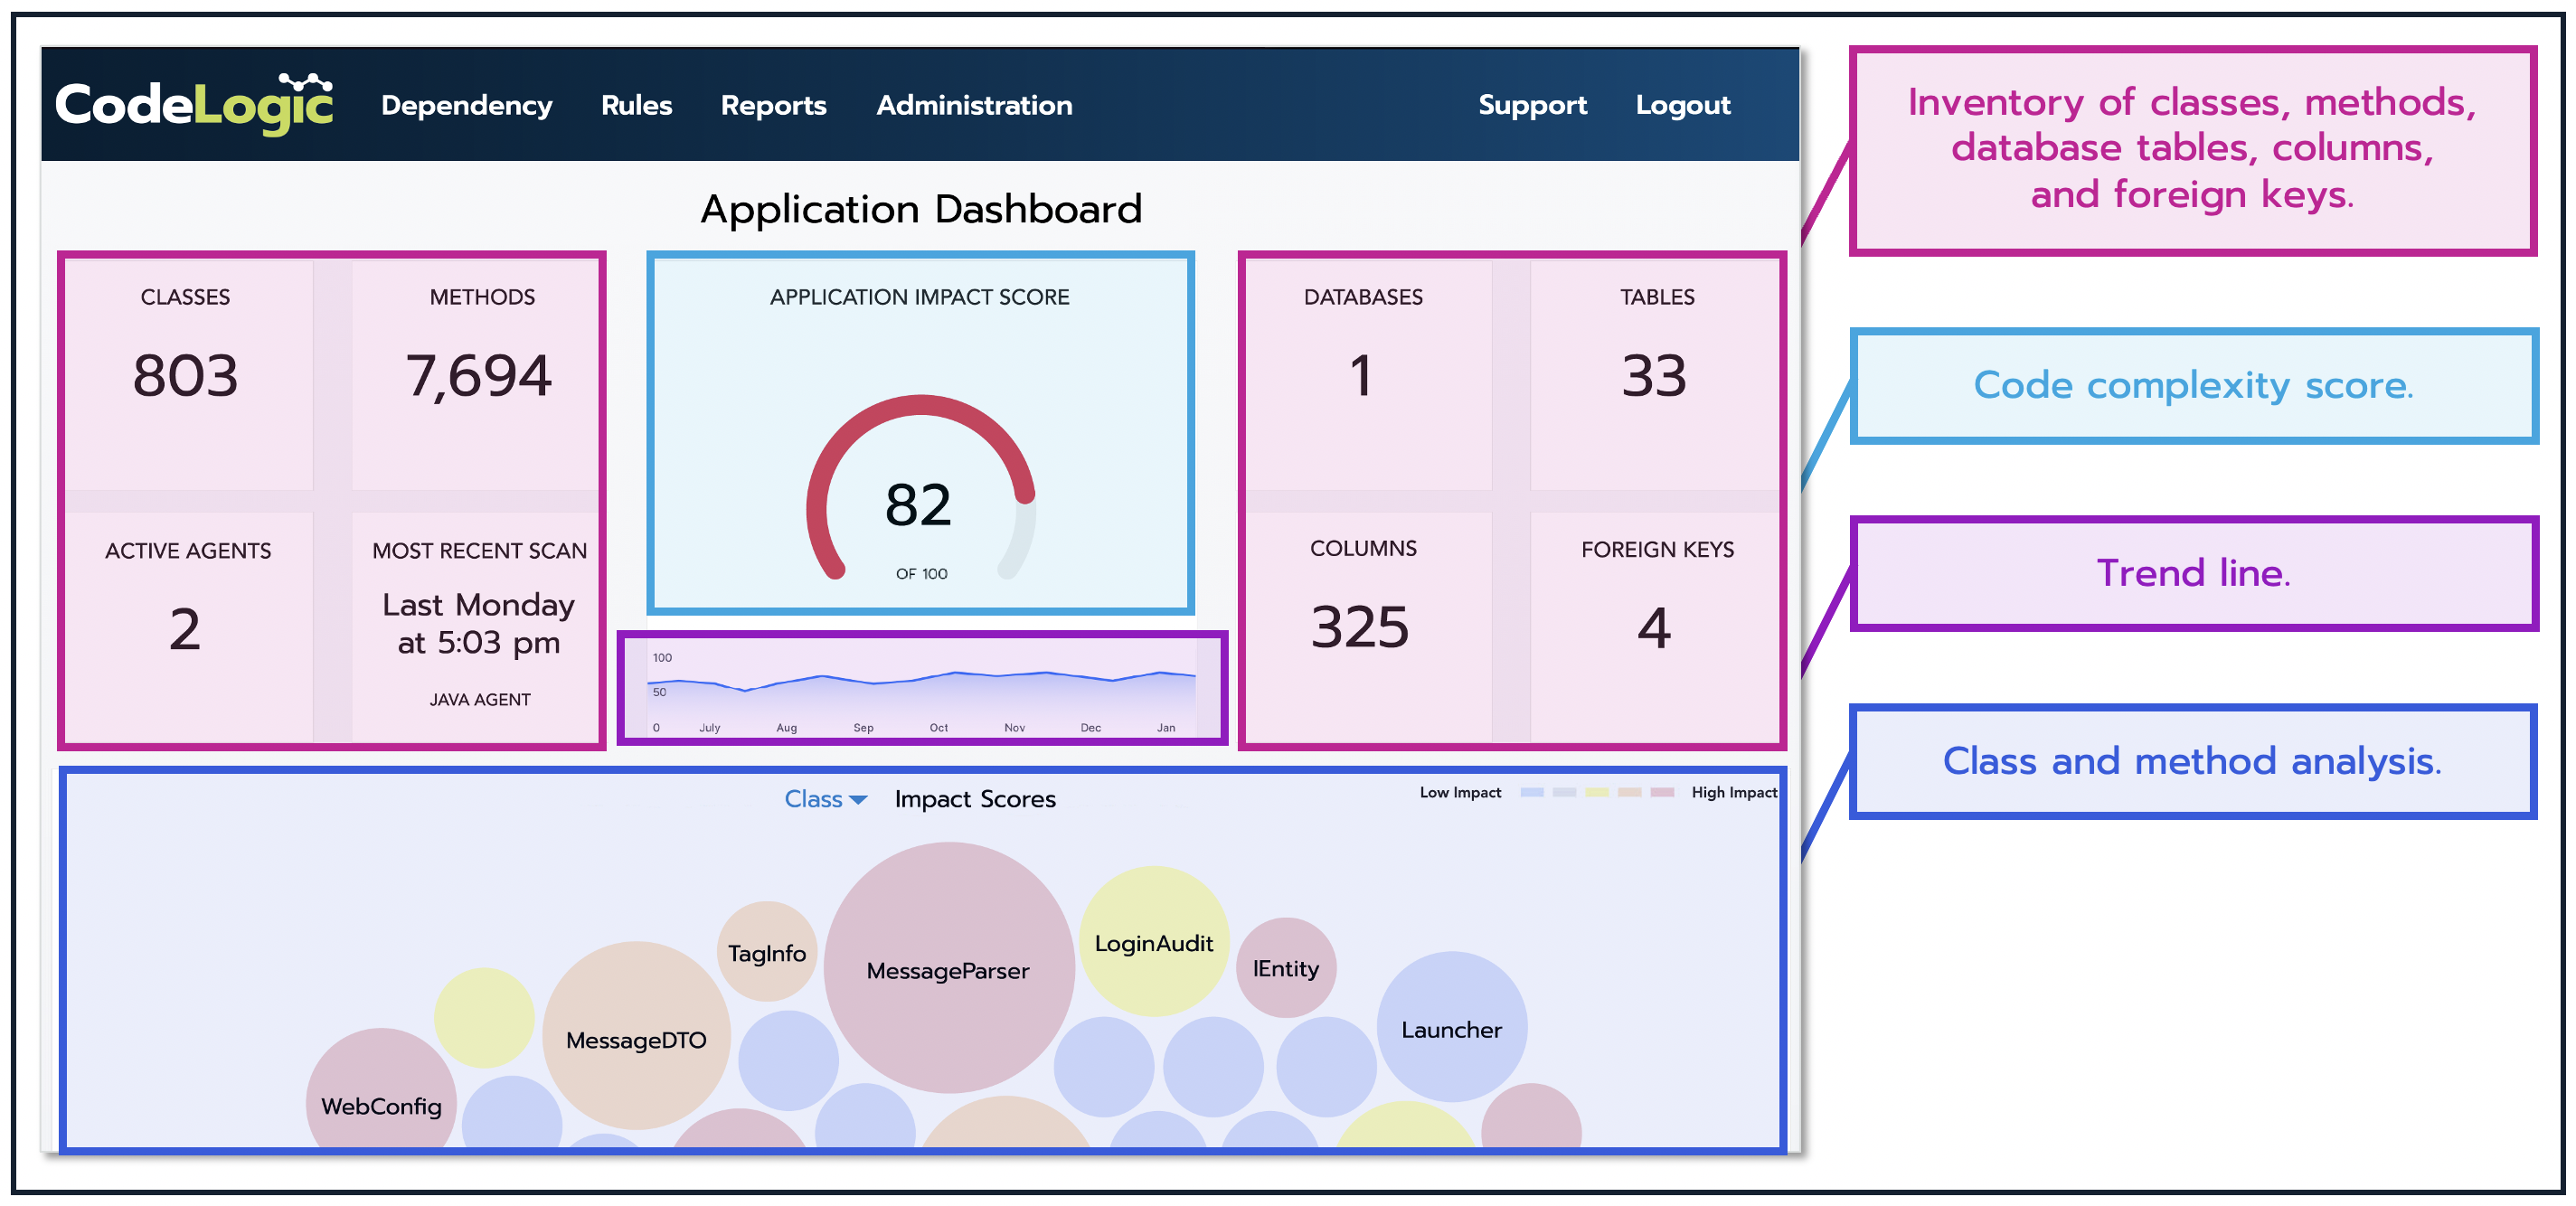 The CodeLogic application dependency analysis dashboard